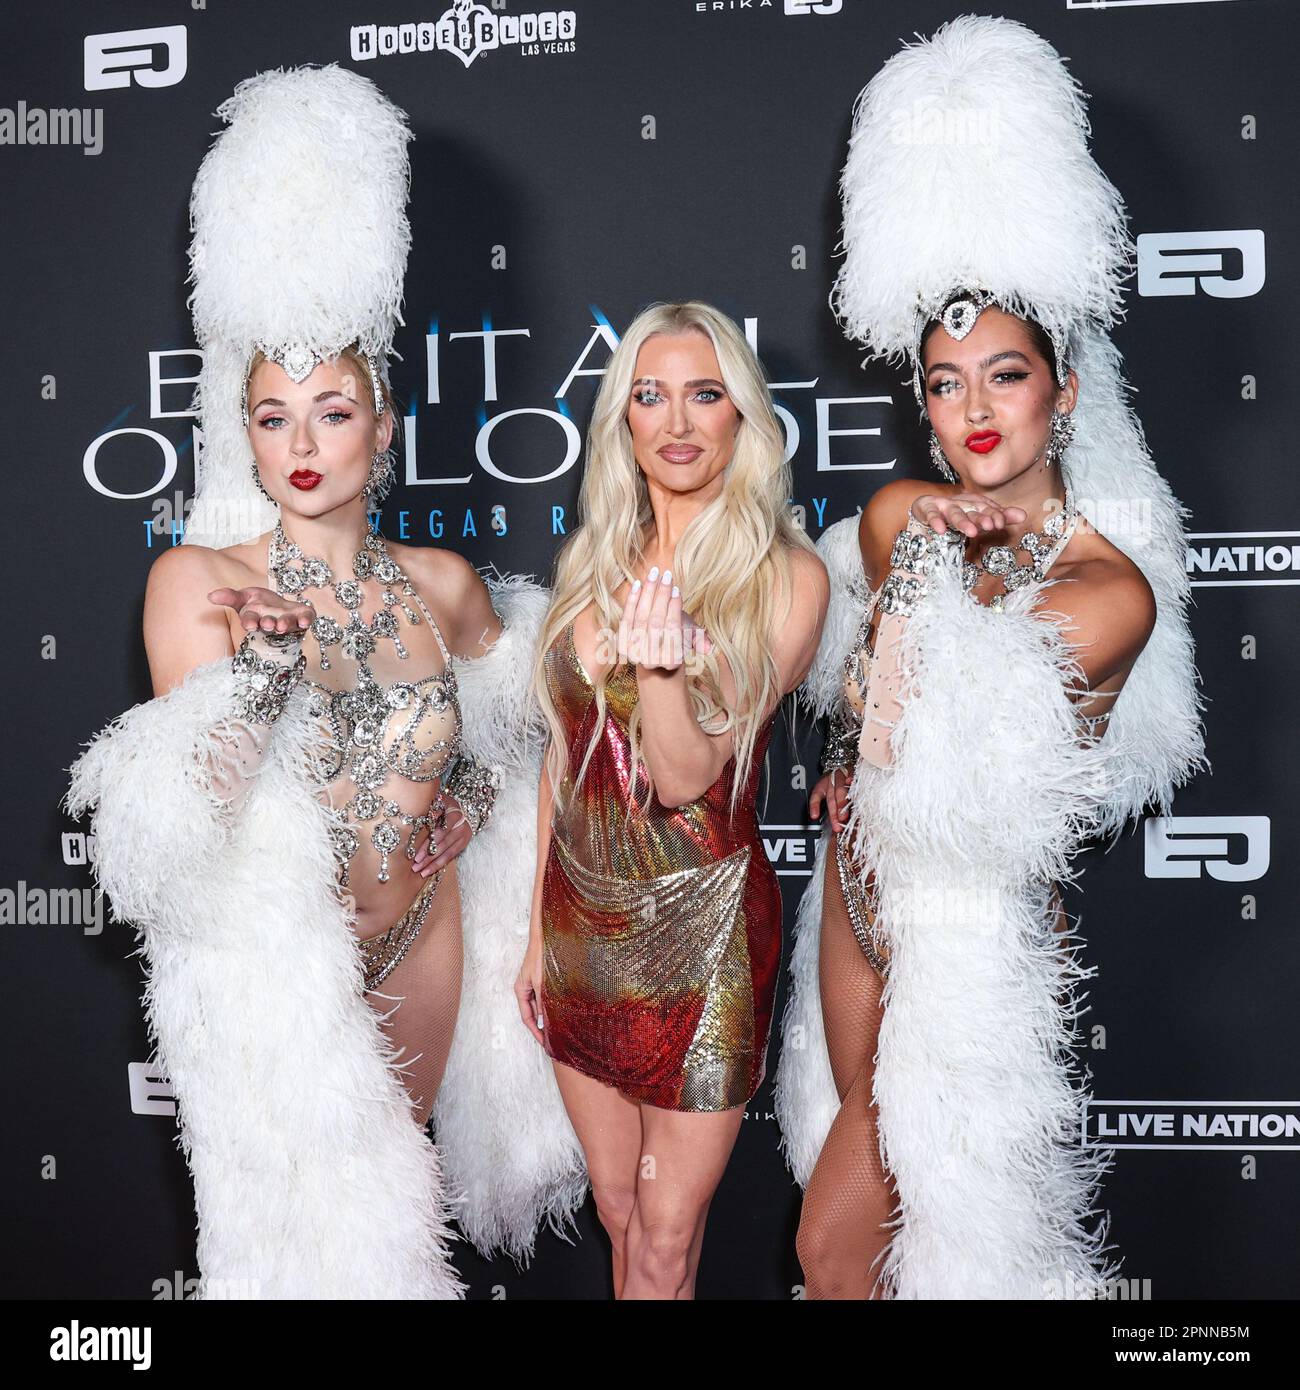 West Hollywood, United States. 19th Apr, 2023. WEST HOLLYWOOD, LOS ANGELES, CALIFORNIA, USA - APRIL 19: American singer, television personality and actress Erika Jayne (Erika Girardi) arrives at the Erika Jayne BET IT ALL ON BLONDE House of Blues Las Vegas Residency Announcement Event held at Bootsy Bellows Los Angeles on April 19, 2023 in West Hollywood, Los Angeles, California, United States. (Photo by Xavier Collin/Image Press Agency) Credit: Image Press Agency/Alamy Live News Stock Photo